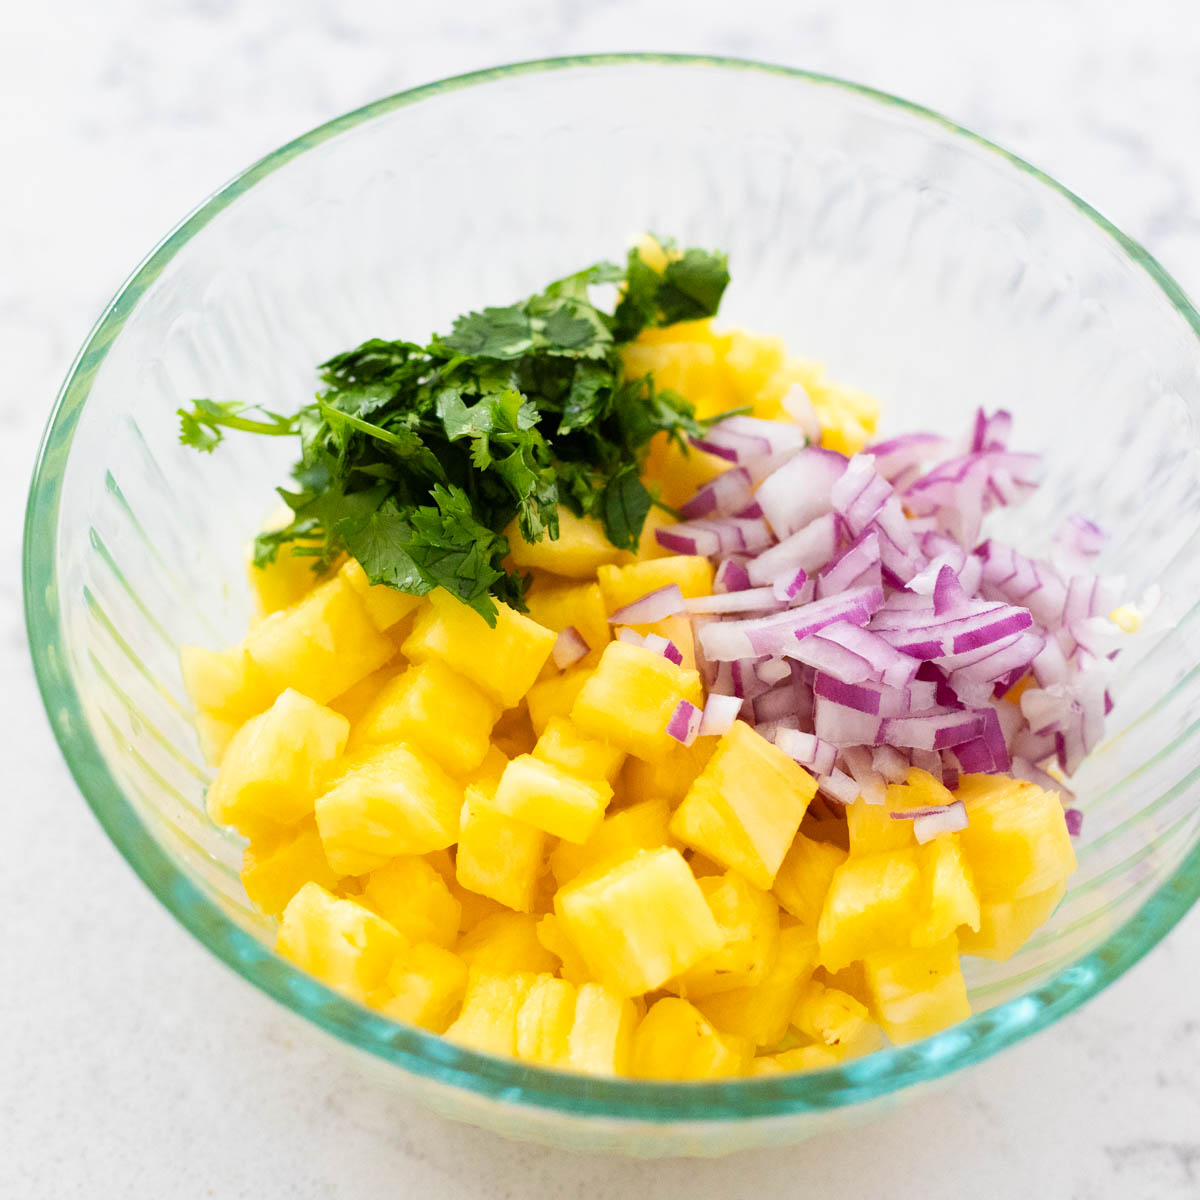 The pineapple, onion, cilantro, and lime juice are about to be stirred together in a mixing bowl.